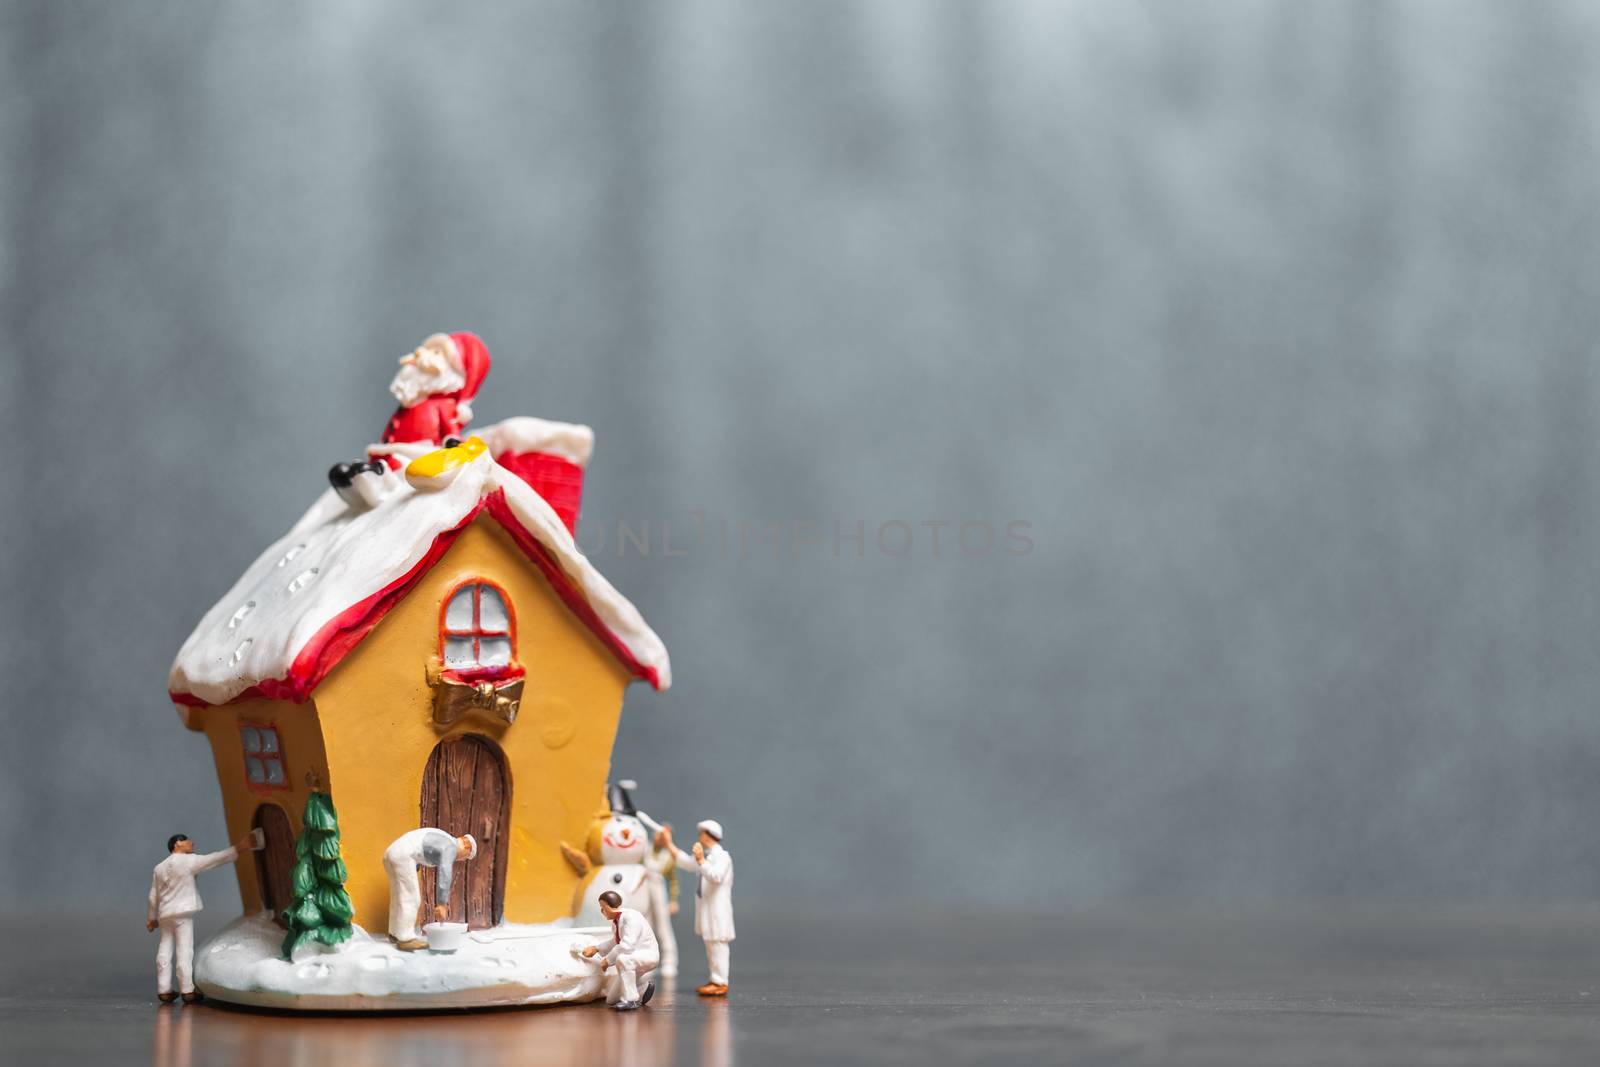 Miniature people painting house and Santa Claus sitting on the roof , Merry Christmas and happy holidays concept.